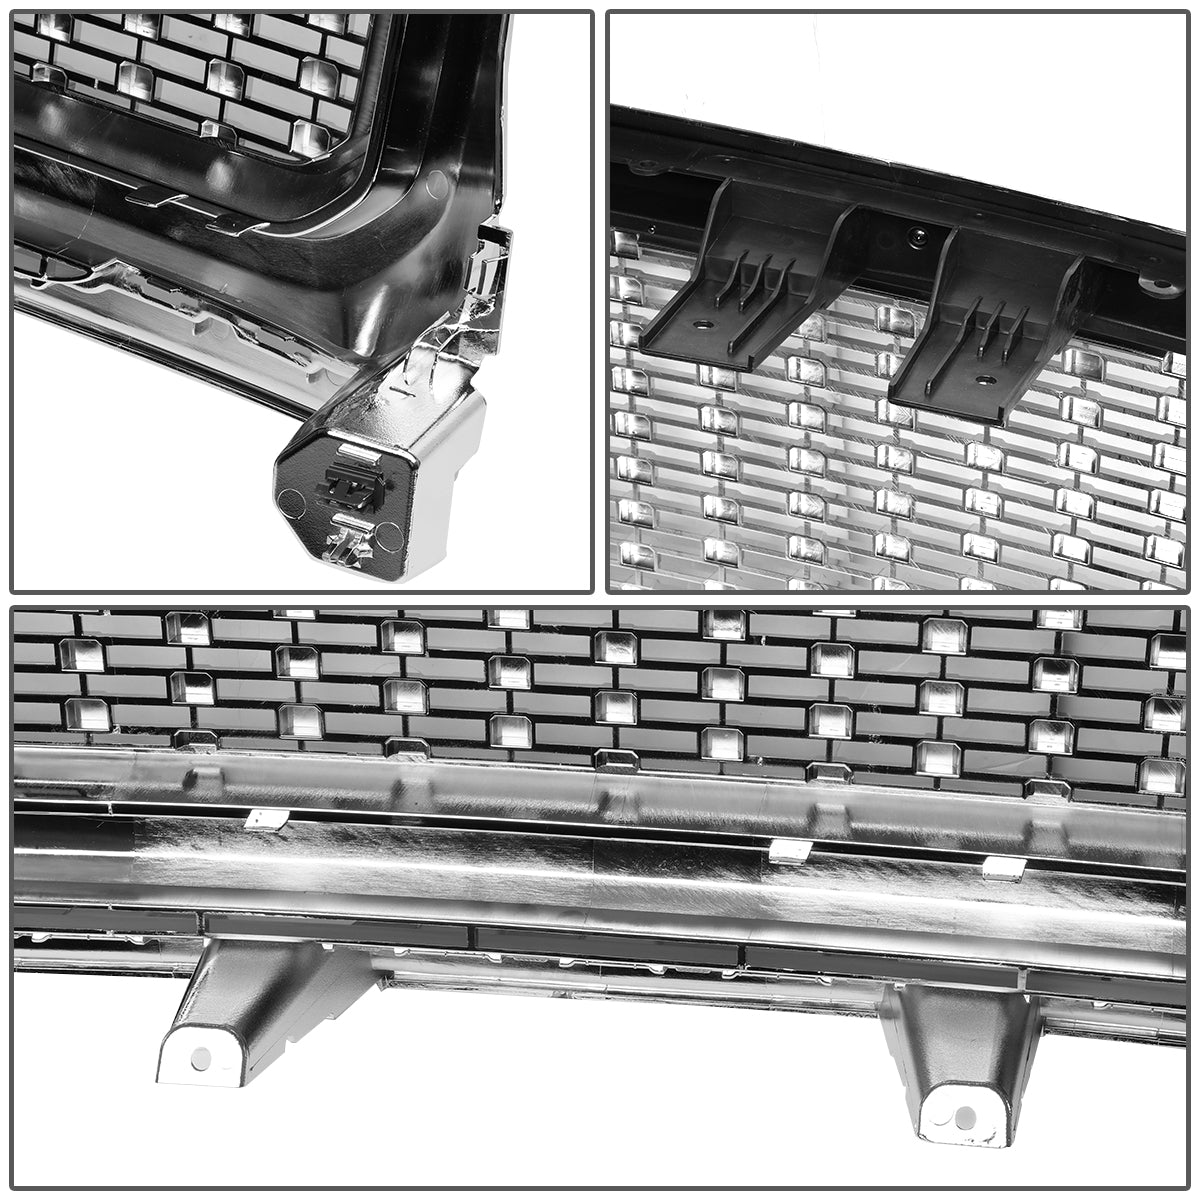 15-18 GMC Canyon Front Grille - Badgeless Denali Style Mesh - Chrome